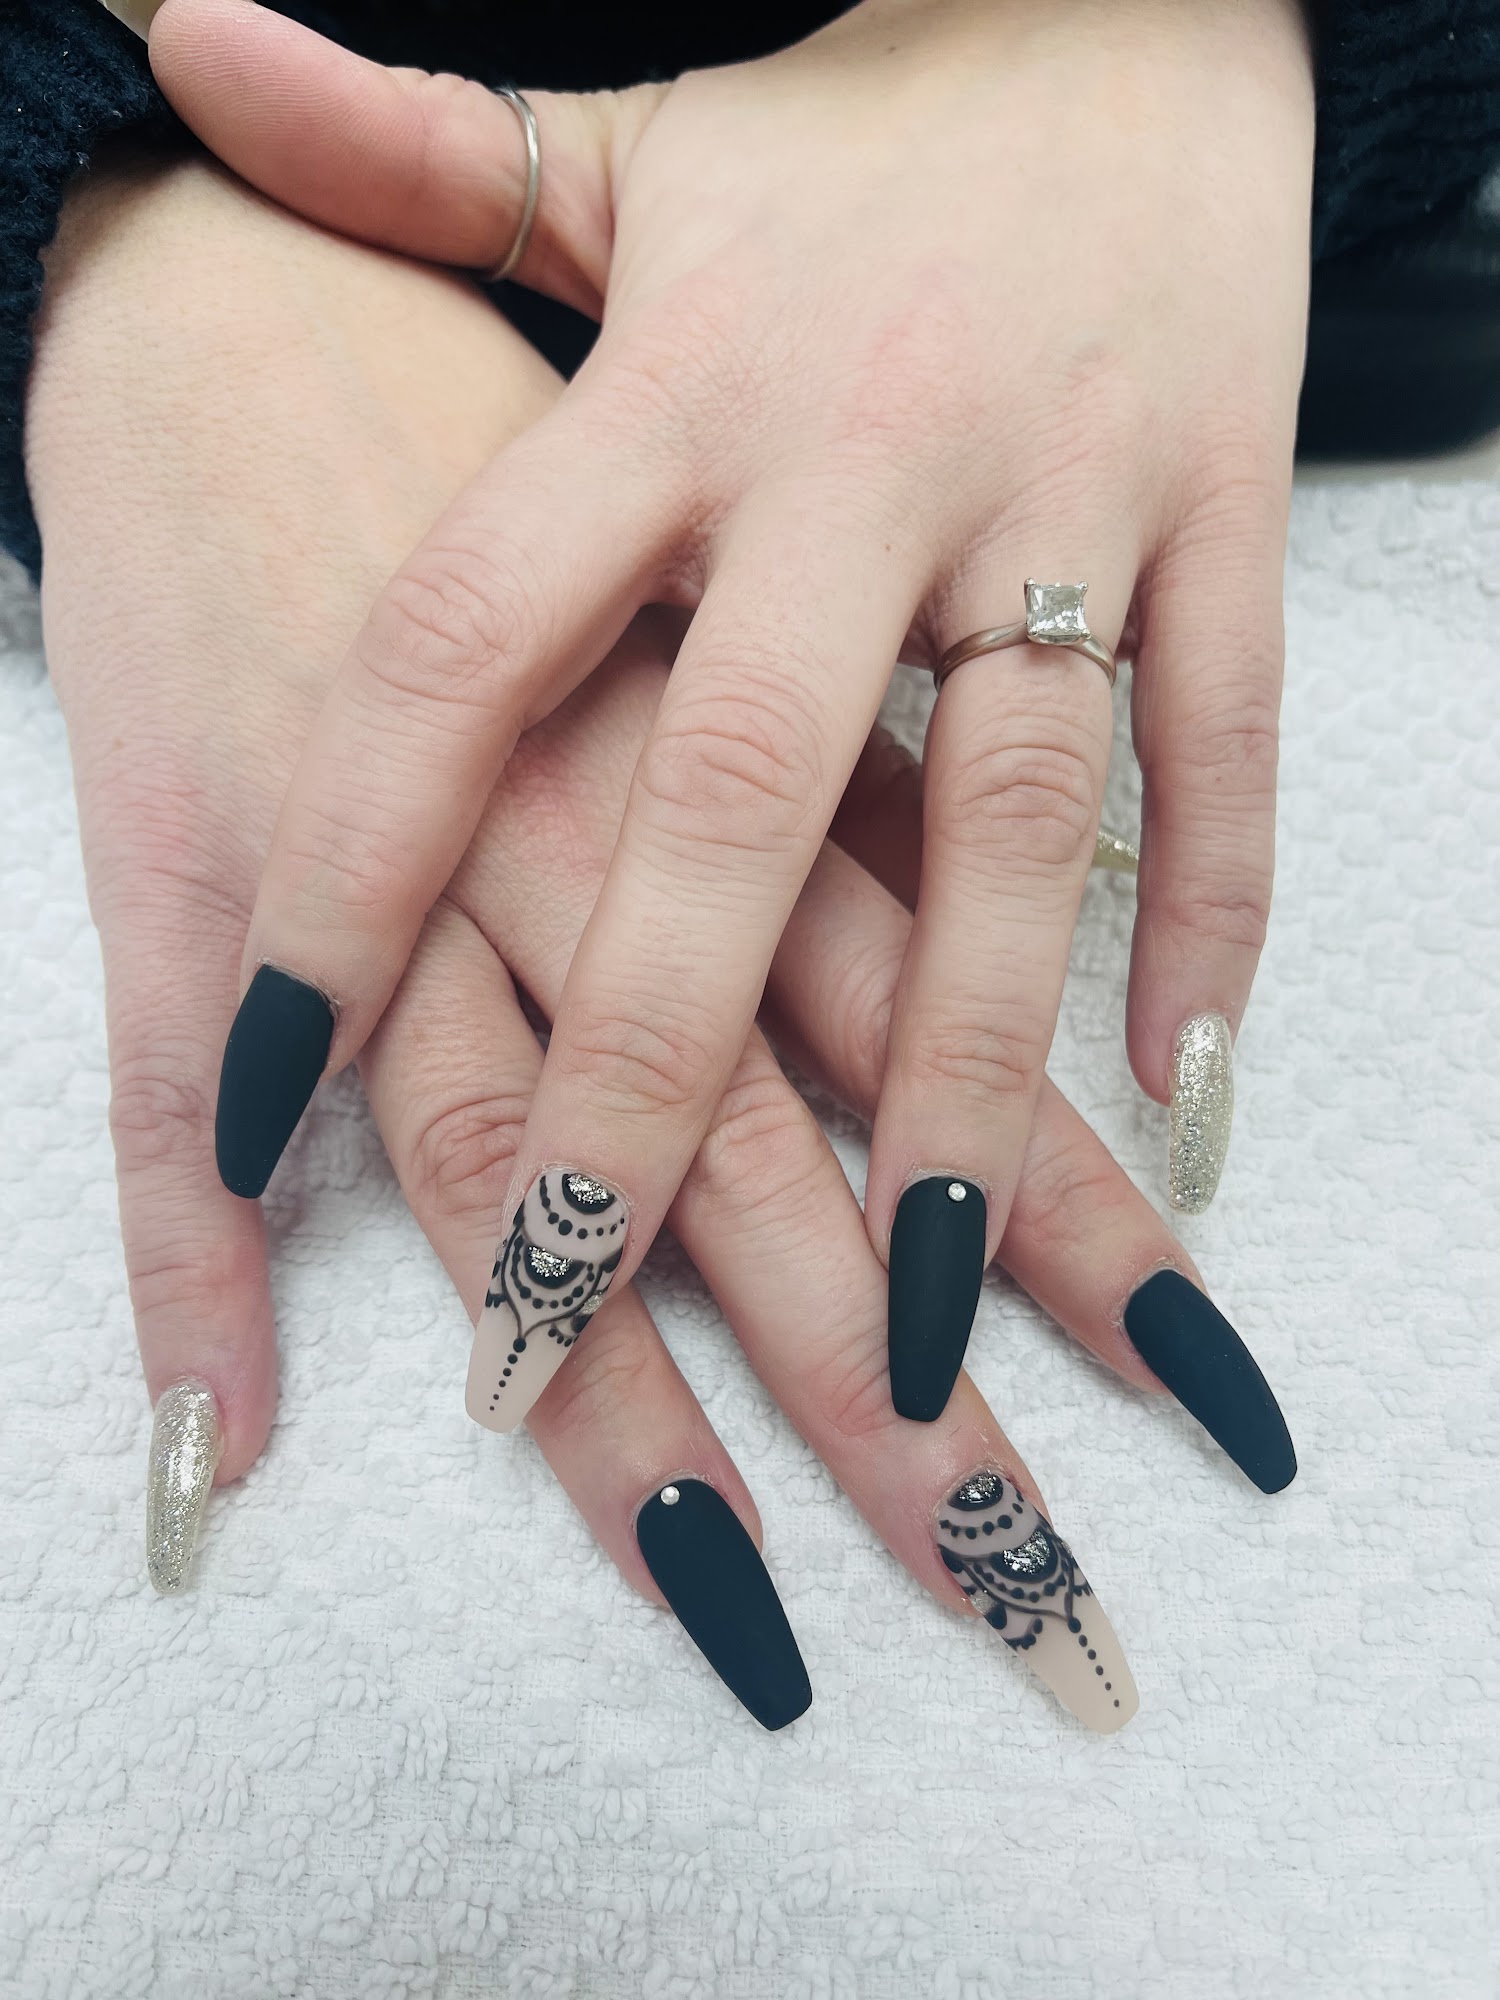 Lily's Nails 109 Peter St, Port Hope Ontario L1A 1C5